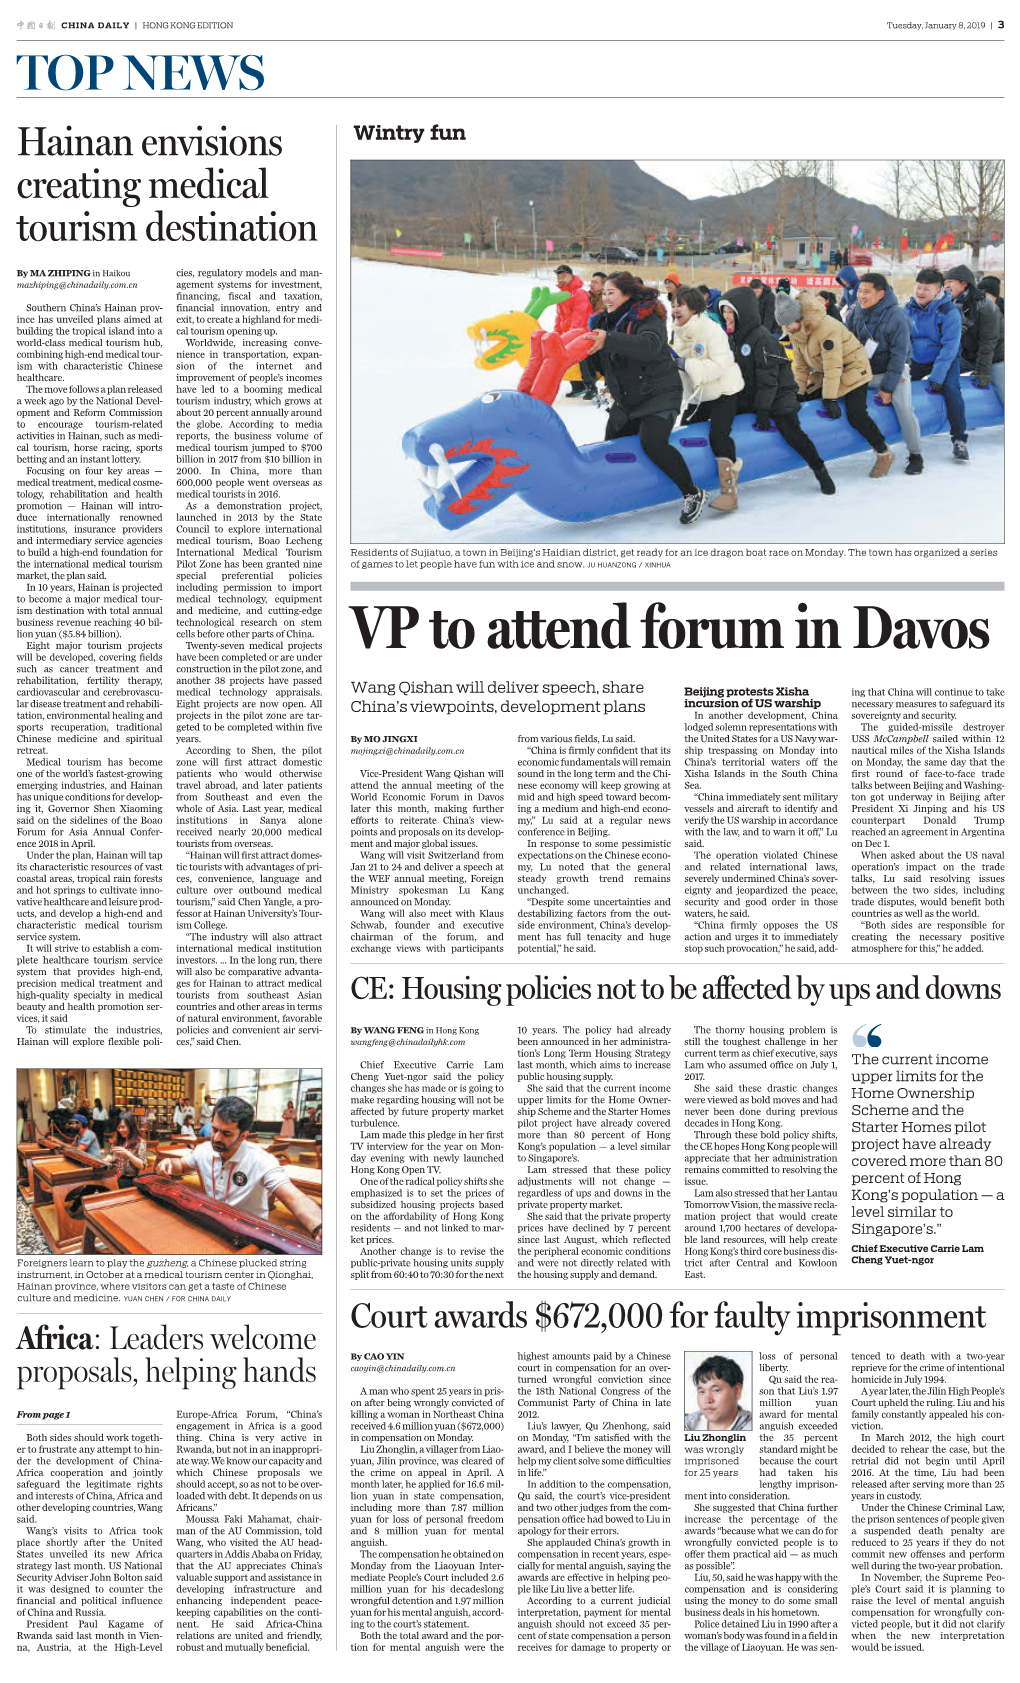 VP to Attend Forum in Davos